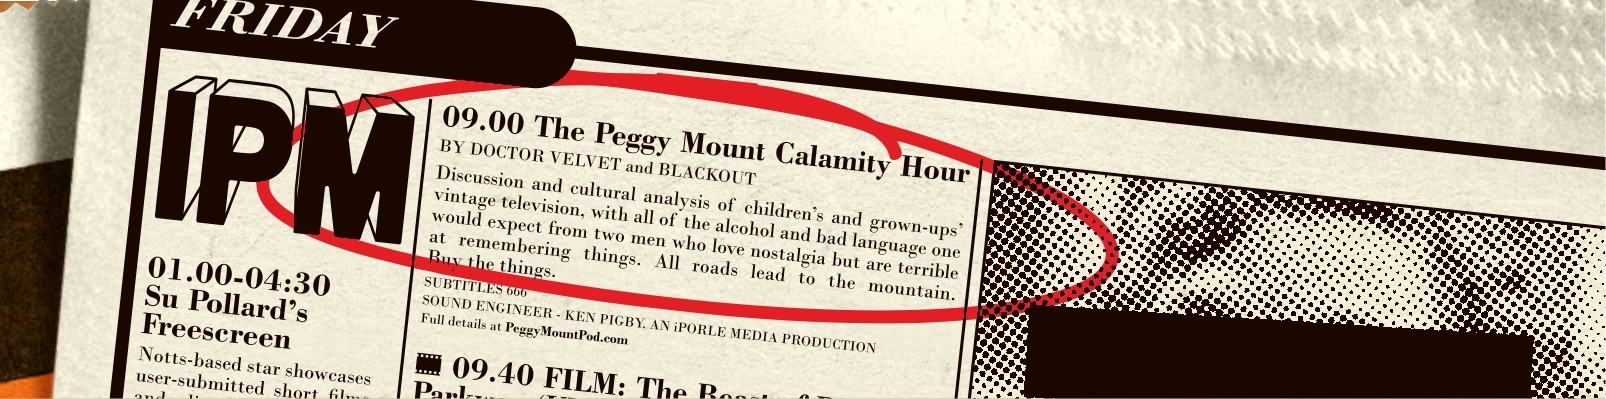 The Peggy Mount Calamity Hour